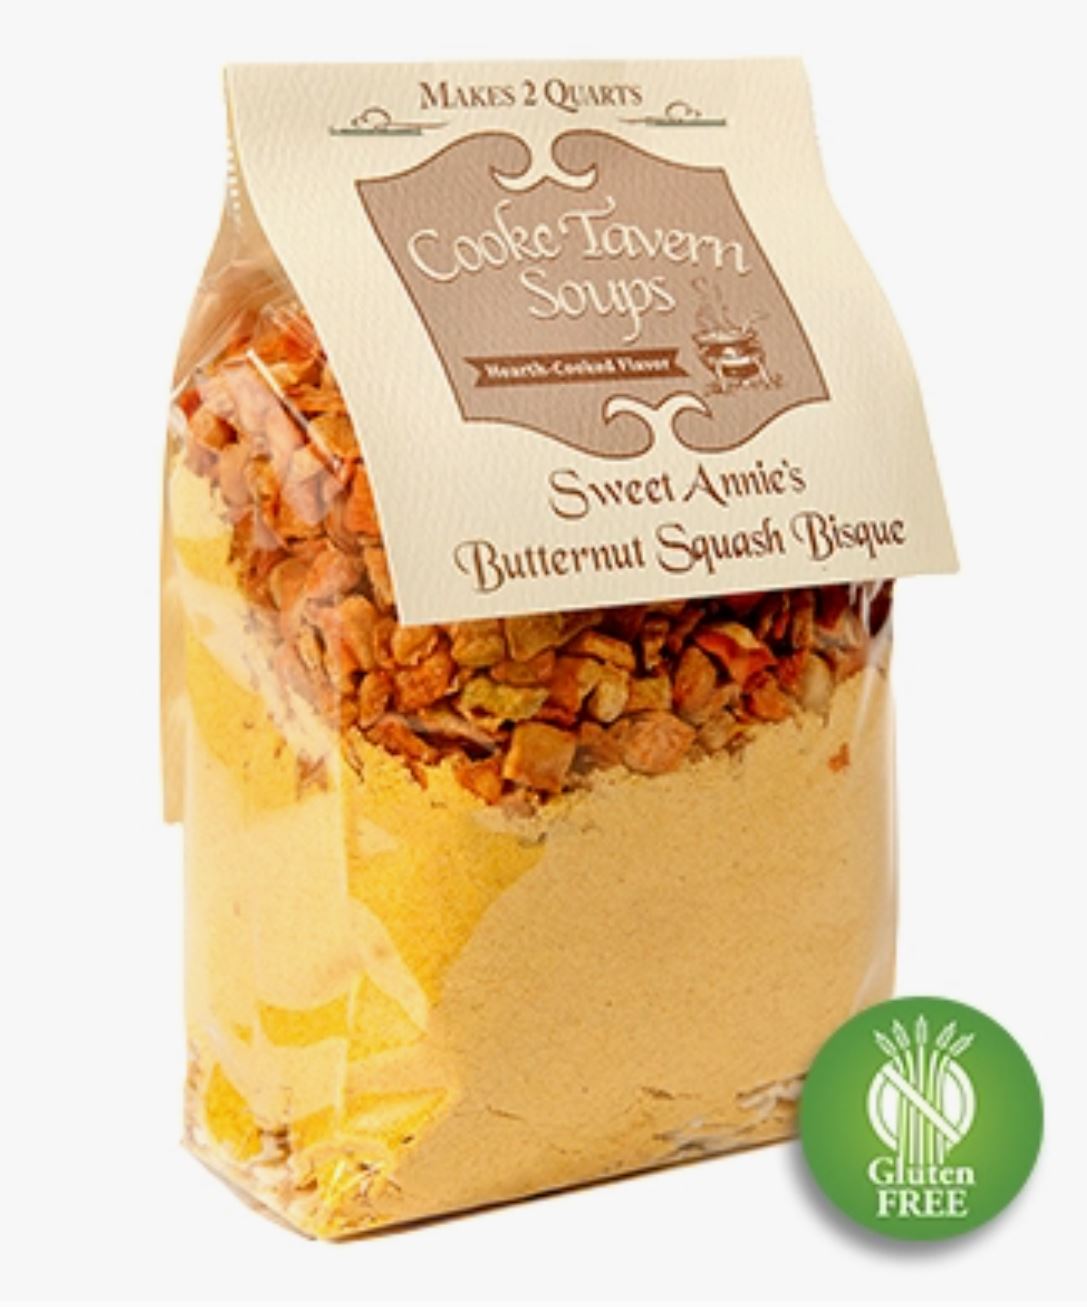 Cooke Tavern - Sweet Annie's Butternut Squash Bisque Dry Soup Mix